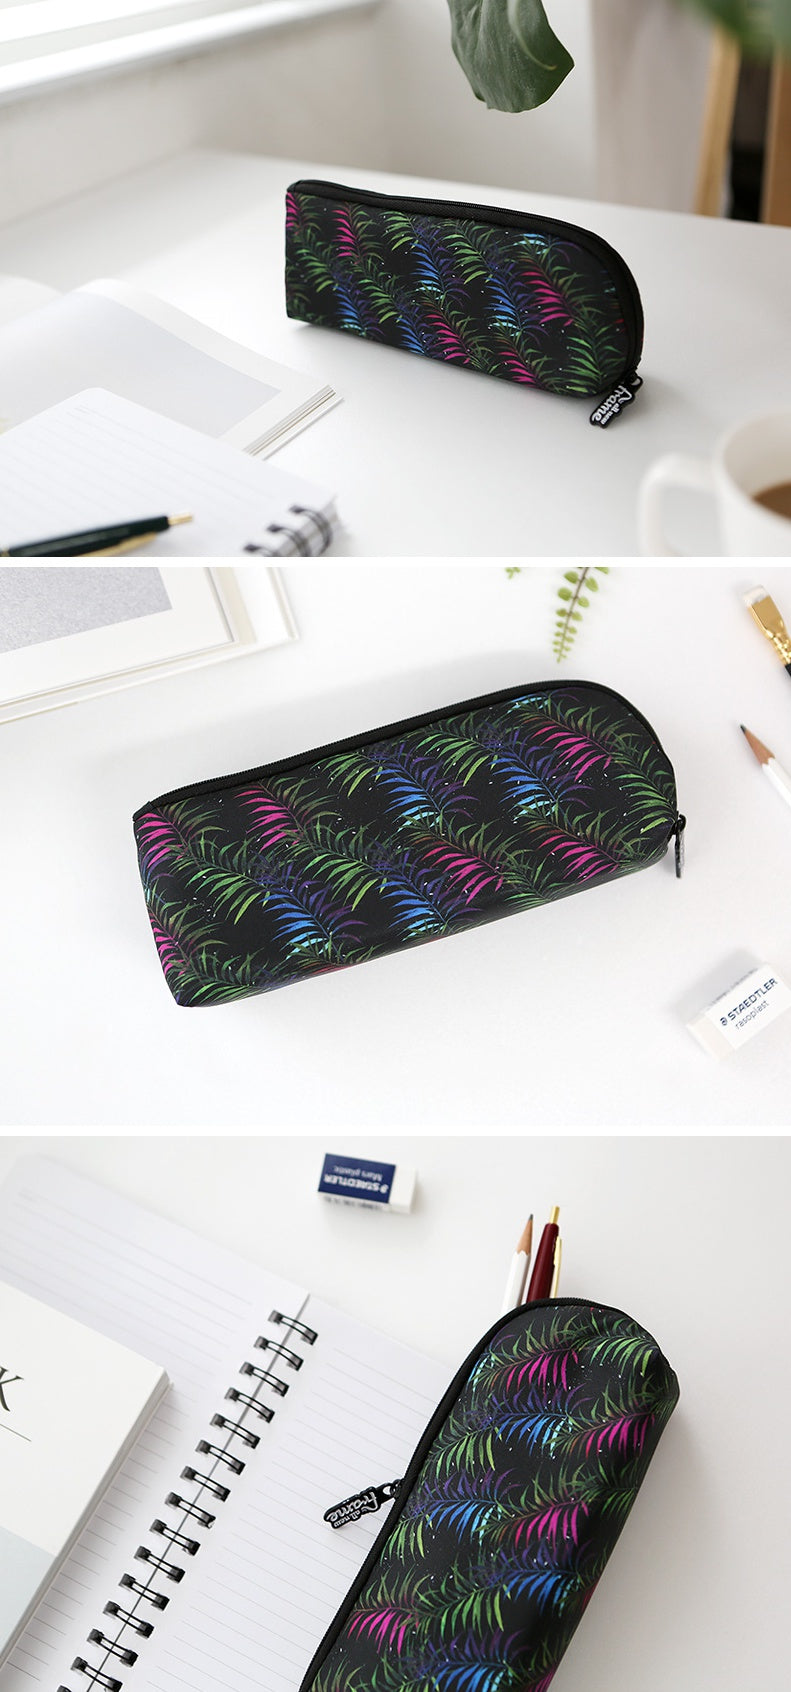 Multi-colored Black Tropical Floral Flower Graphic Pencil Cases Stationery Zipper School 19cm Office organizers cosmetic pouches Gifts Bags Purses